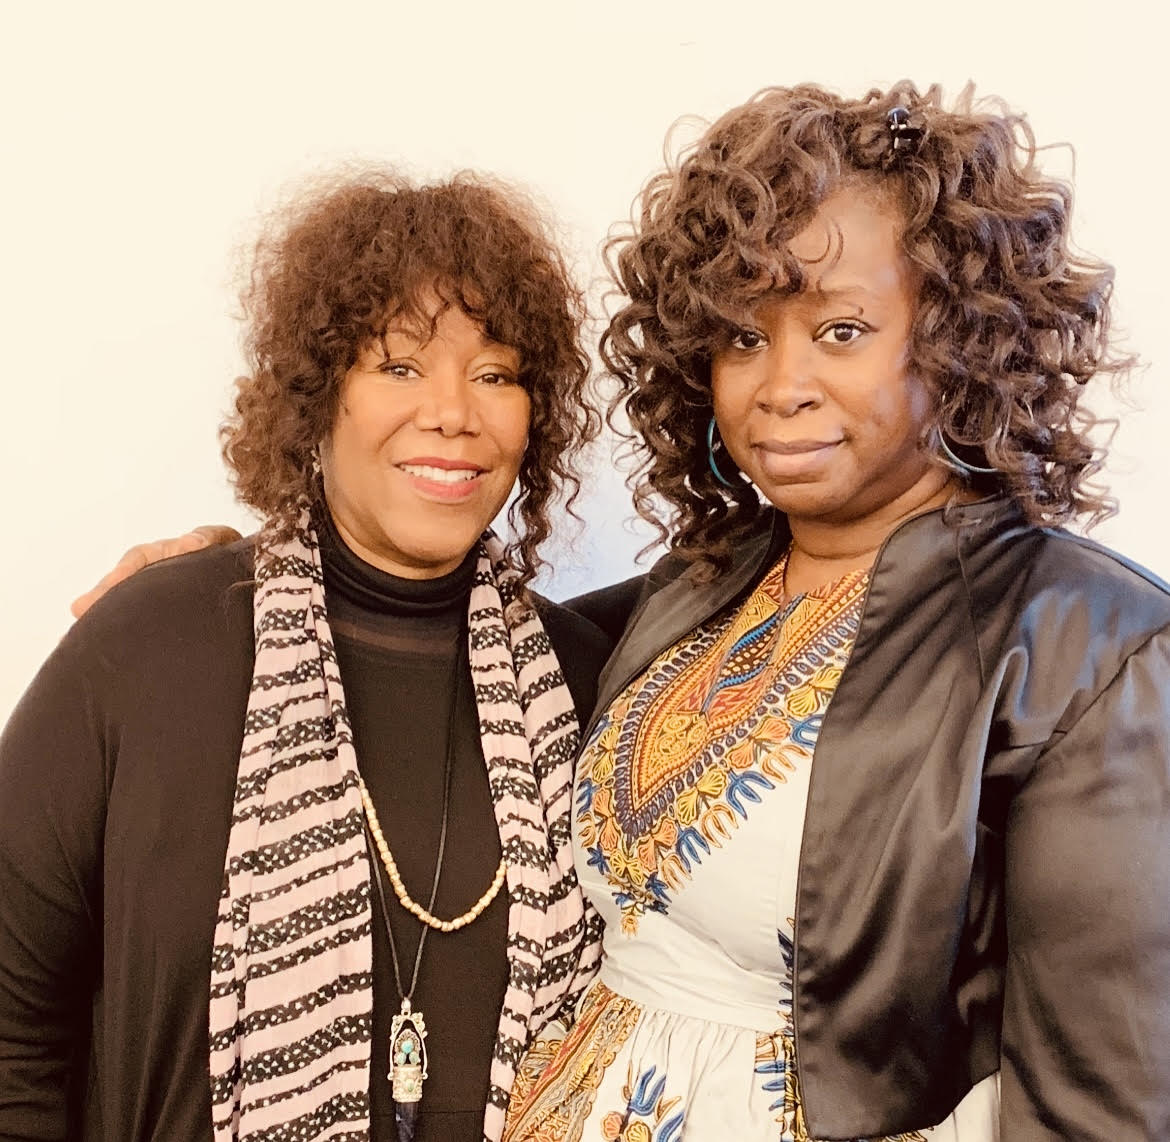 In this photo, you can see Tanisha Hall posing with Ruby Bridges. Hall has her arm over Bridges' shoulders as they both smile at the camera.